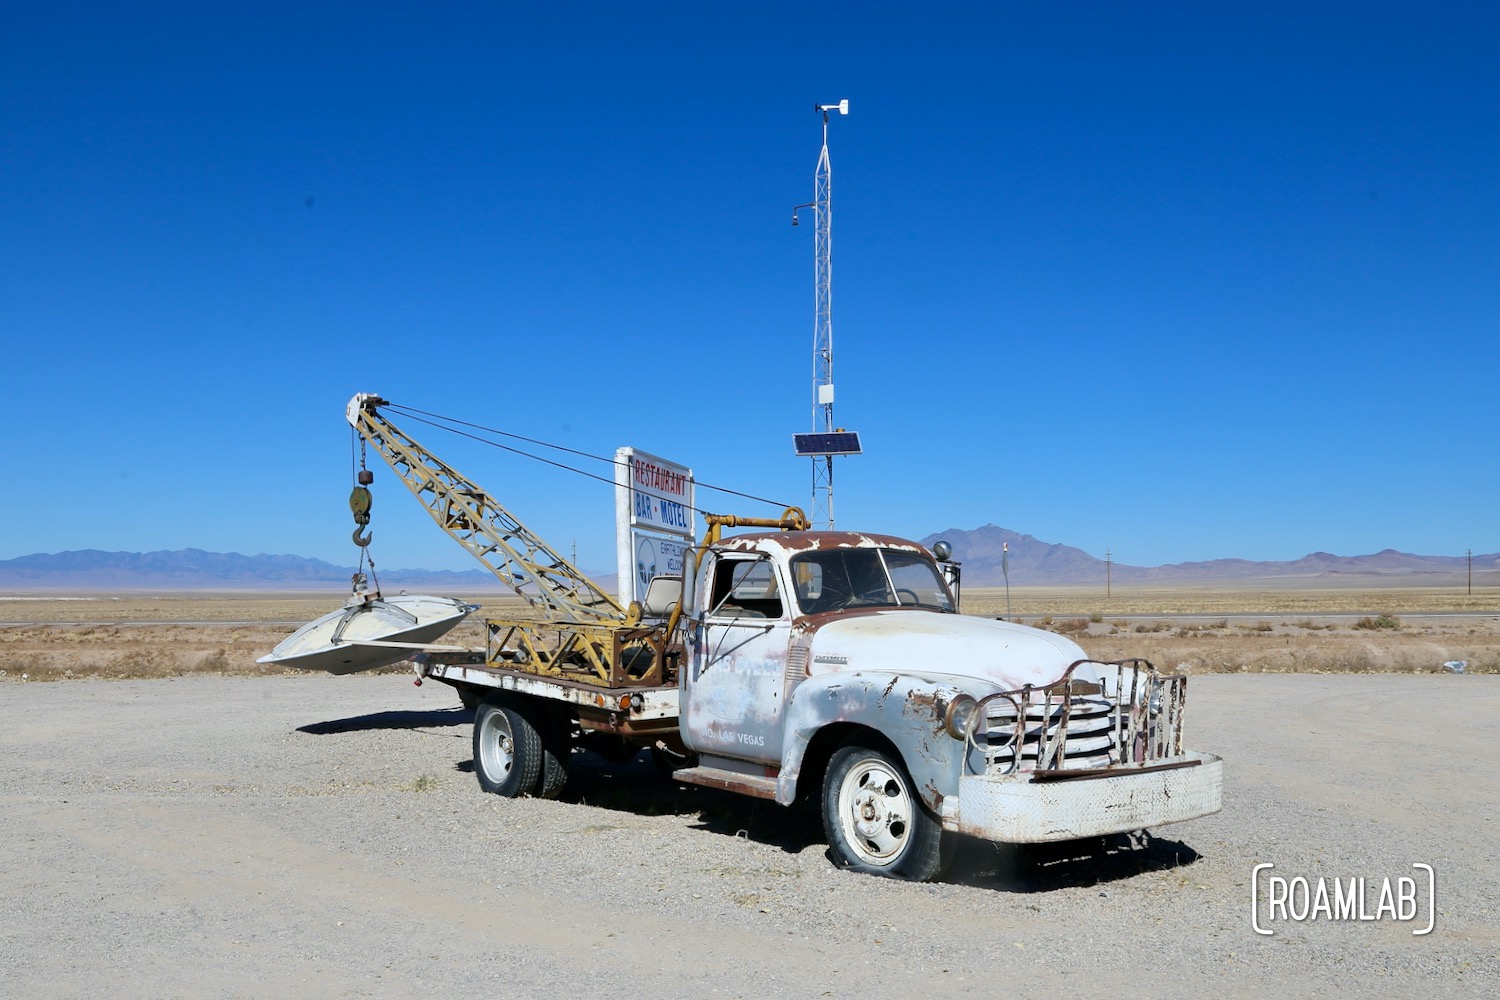 The CIA may have only acknowledged the existence of Area 51 on June 25, 2013, but this isolated patch south of Rachel, Nevada has been a hot-spot of ufo, extra-terrestrial, and conspiracy theory for decades.